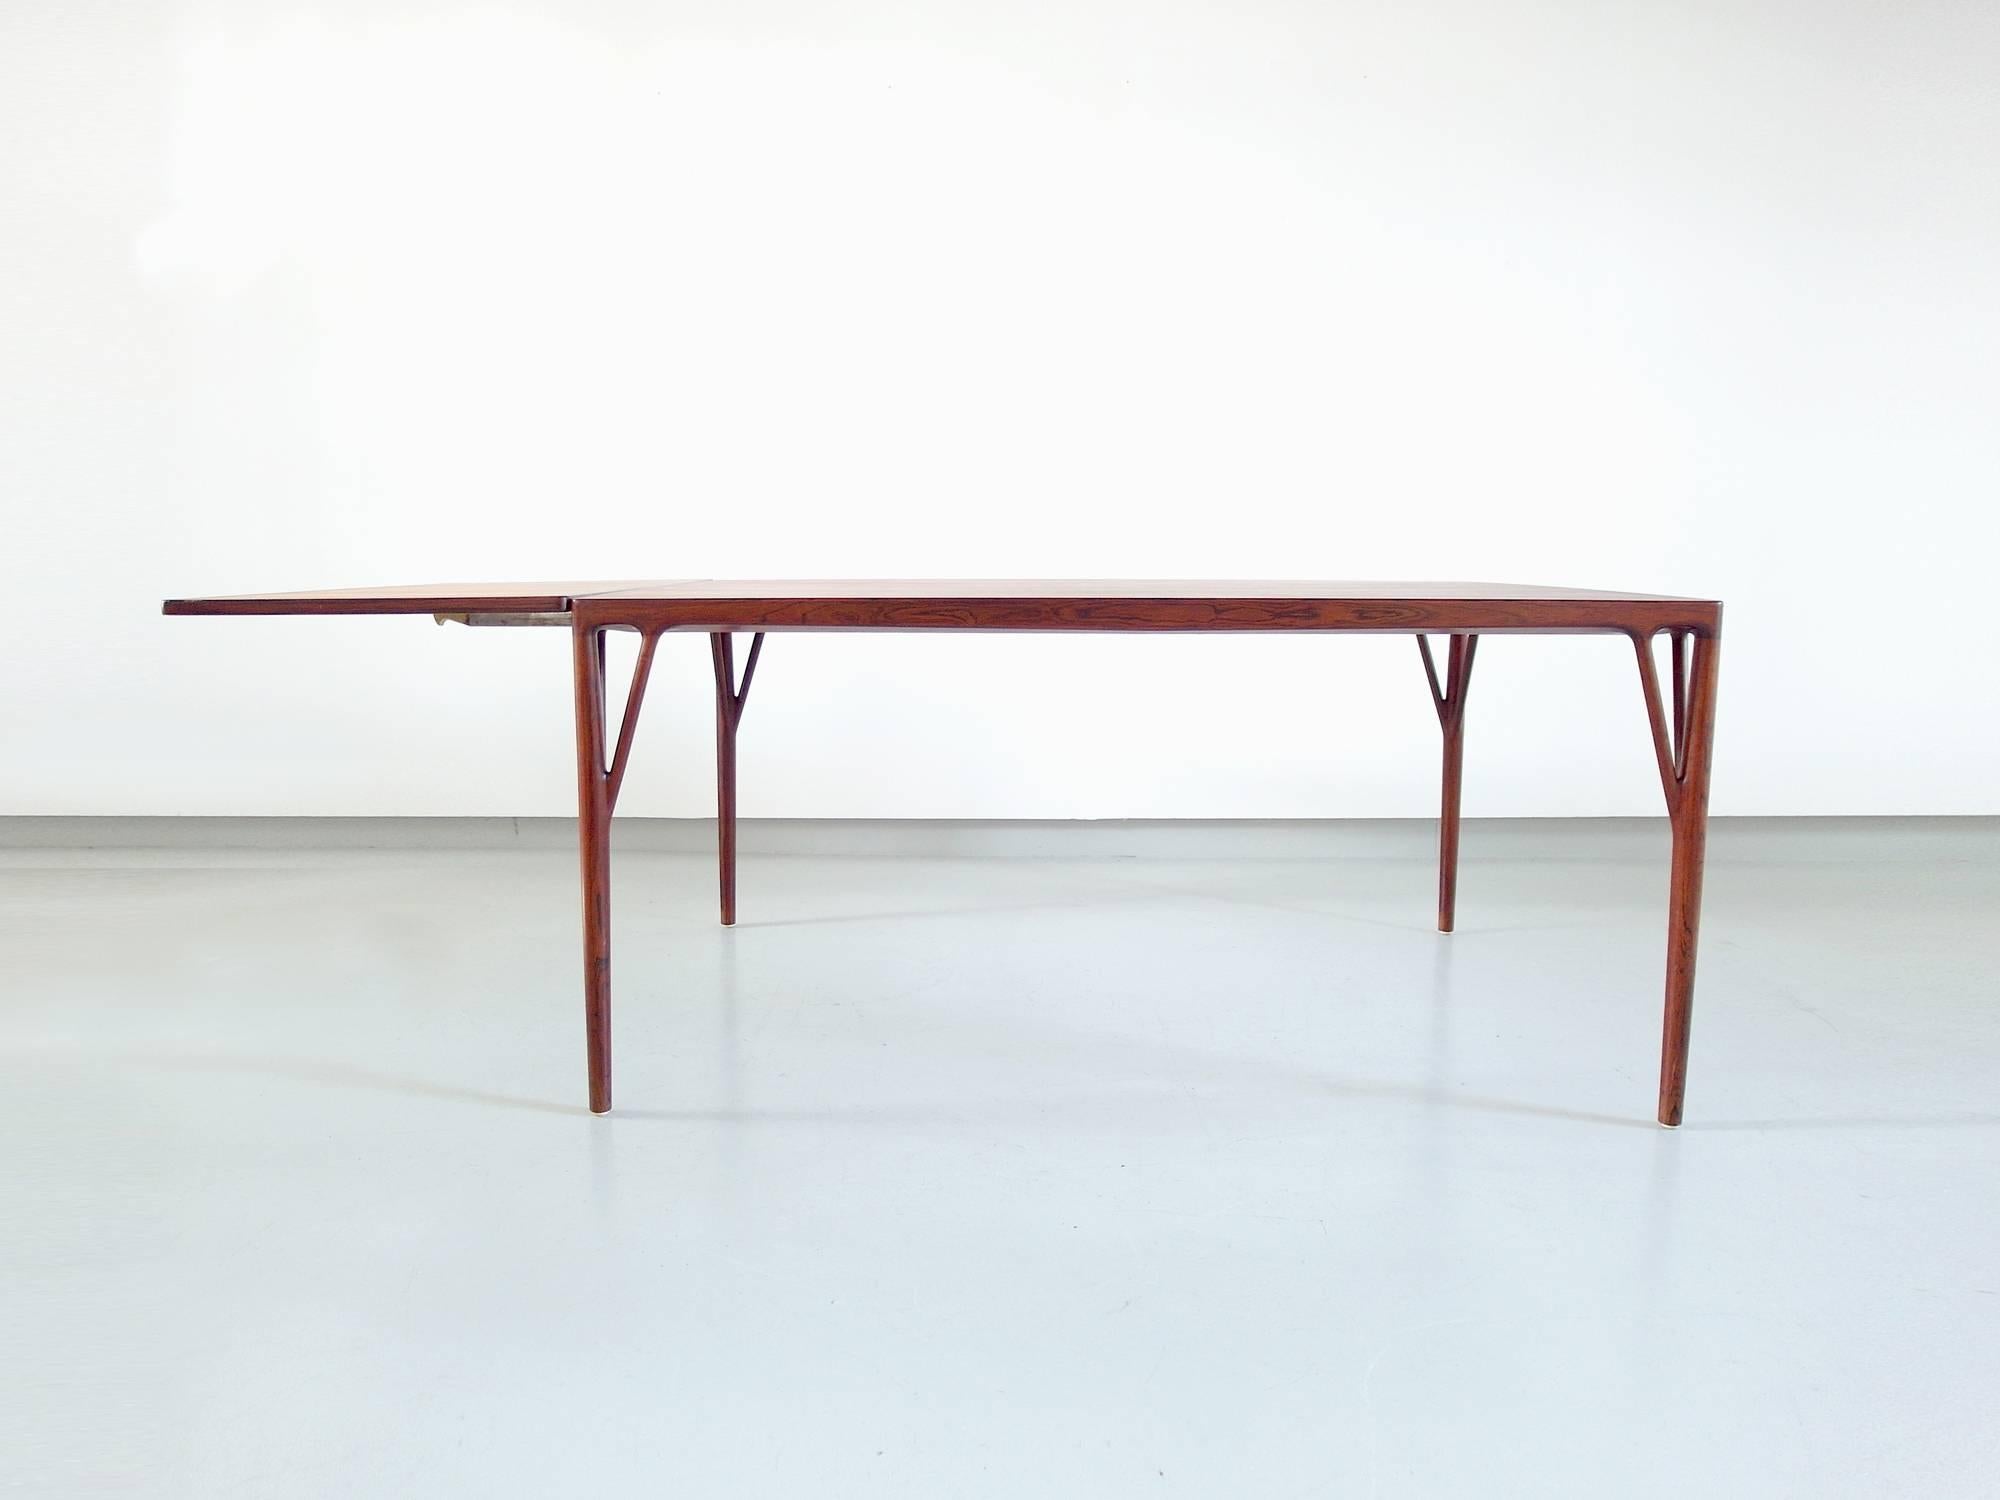 Stunning custom-made sculptural Helge Vestergaard Jensen dining table with beautiful organic shaped details, Denmark, 1957. Manufactured by Peder Pedersen Copenhagen, Denmark.

Vestergaard Jensen's work is highly coveted by collectors due to its